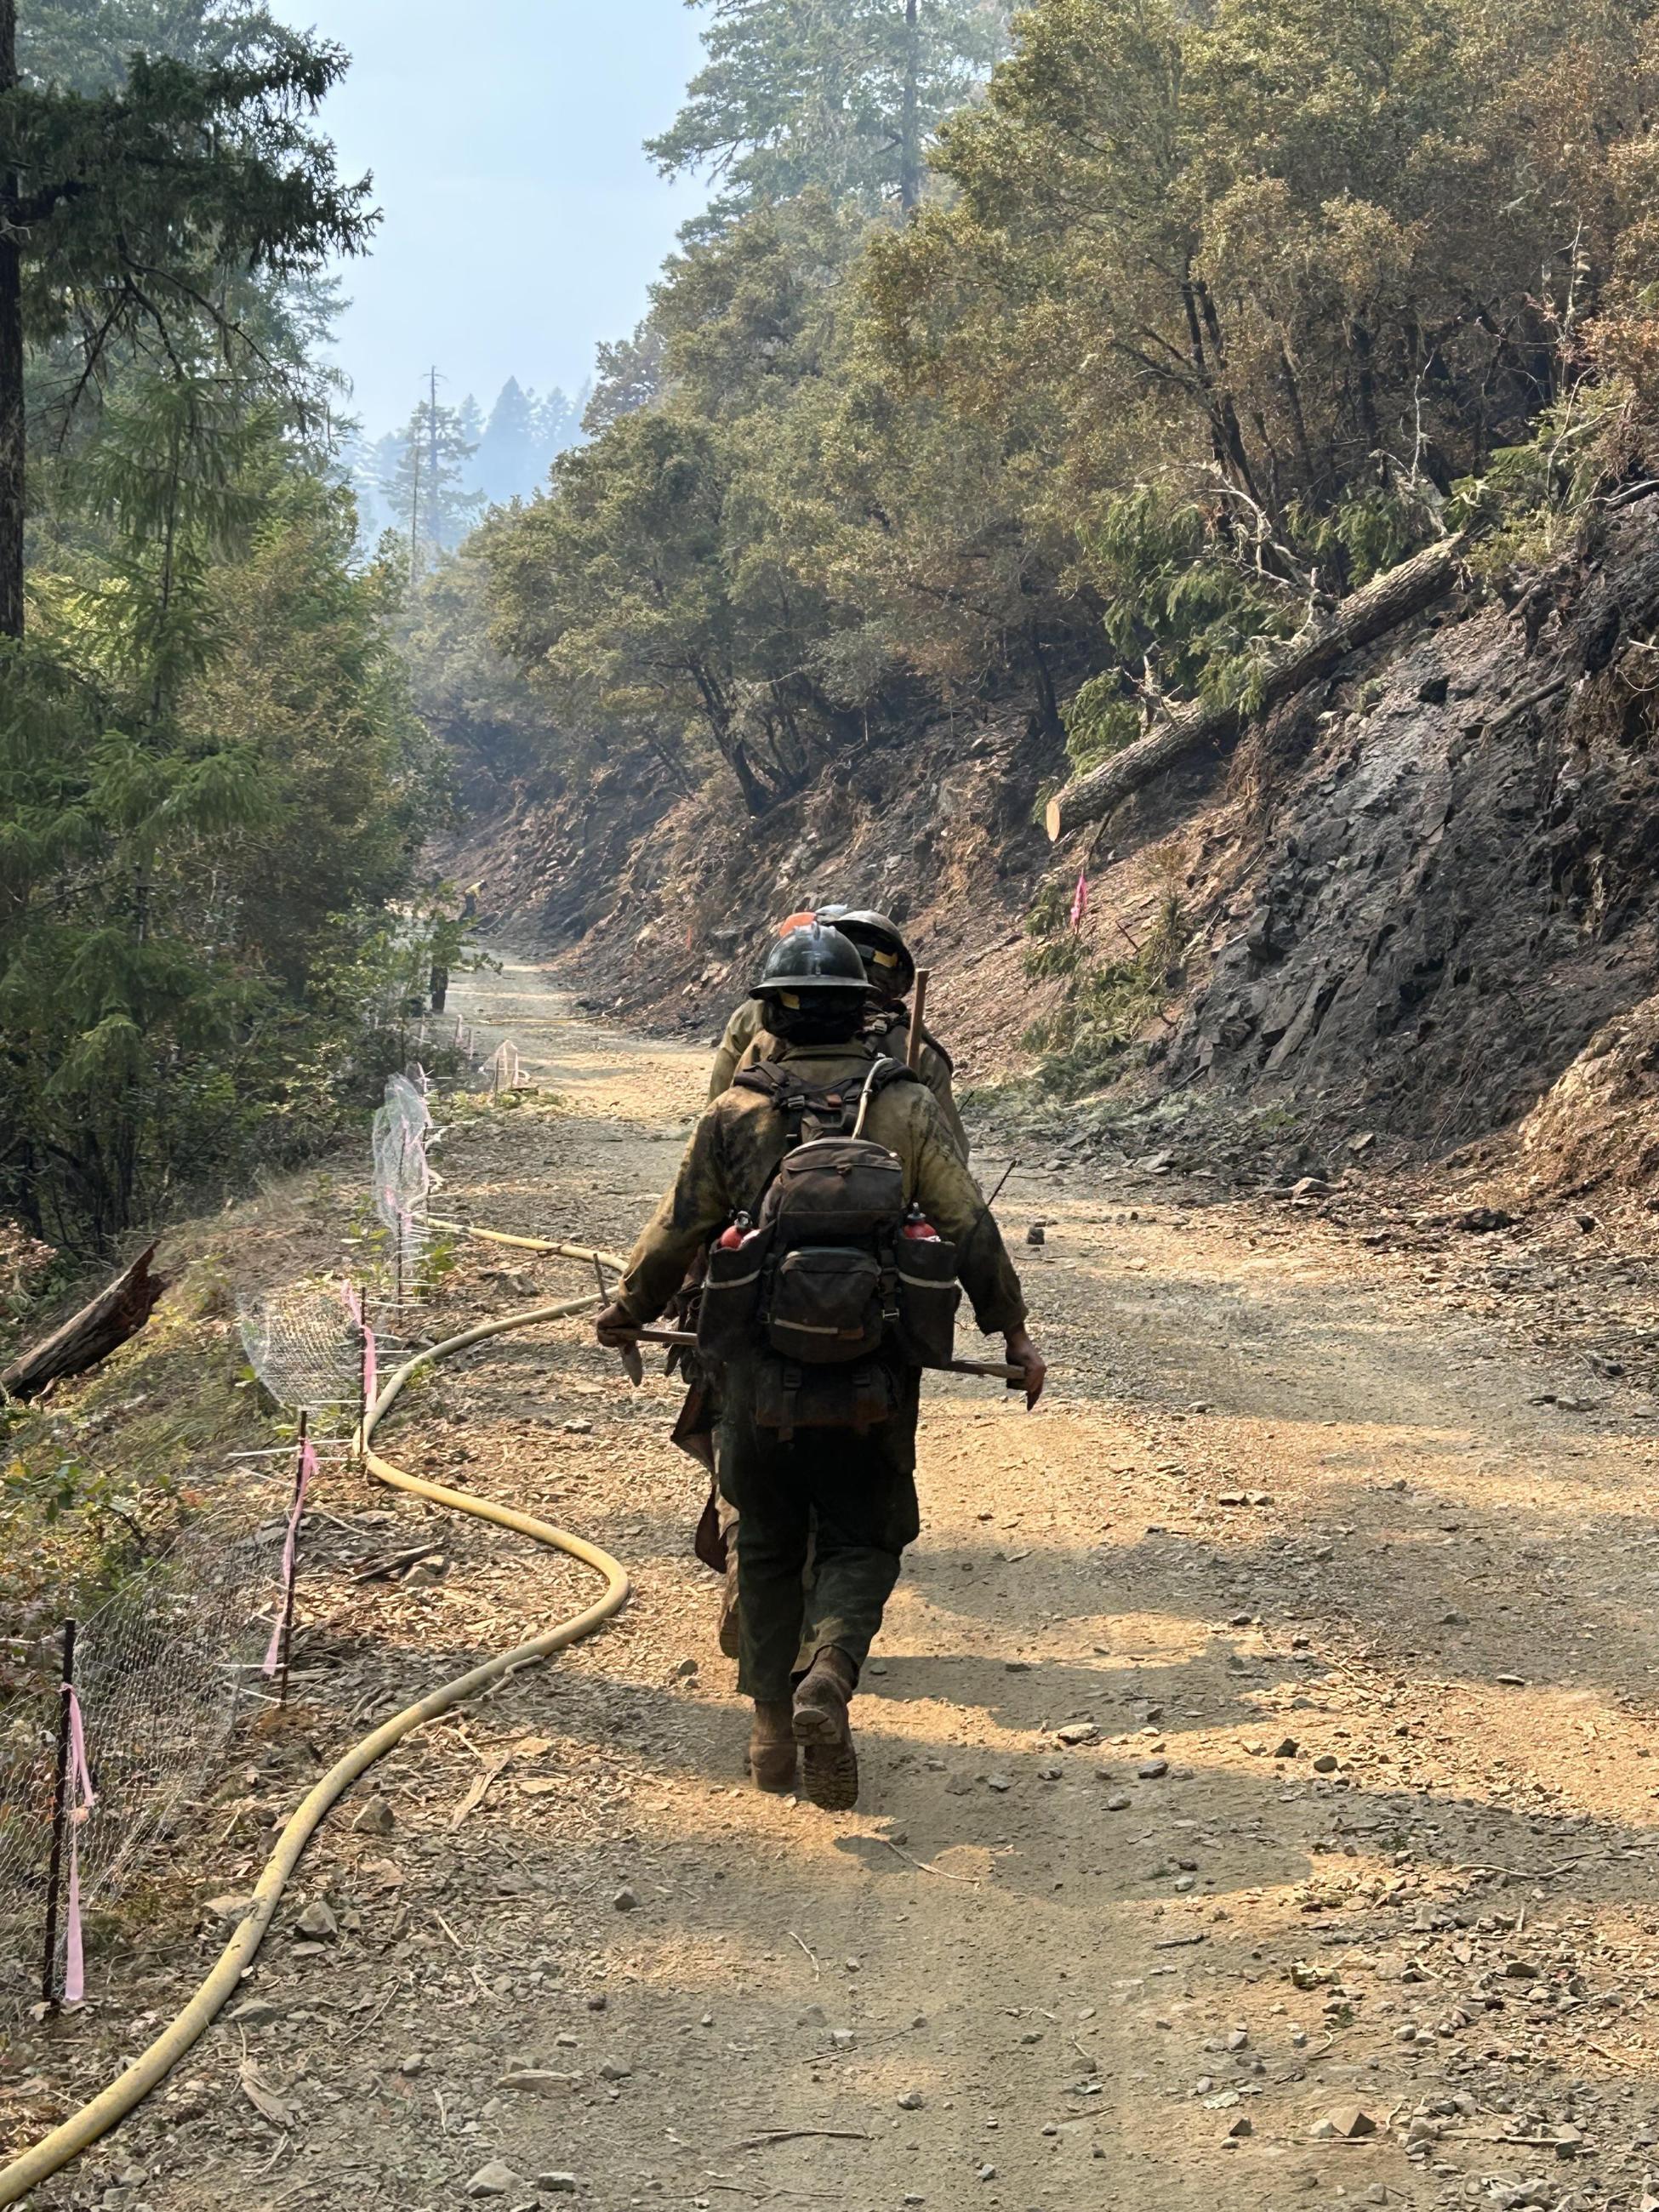 Mammoth Wildland Fire Module Crew 2 mopping up and patrolling the fire line above Coon Creek, Smith River Complex South September 15, 2023